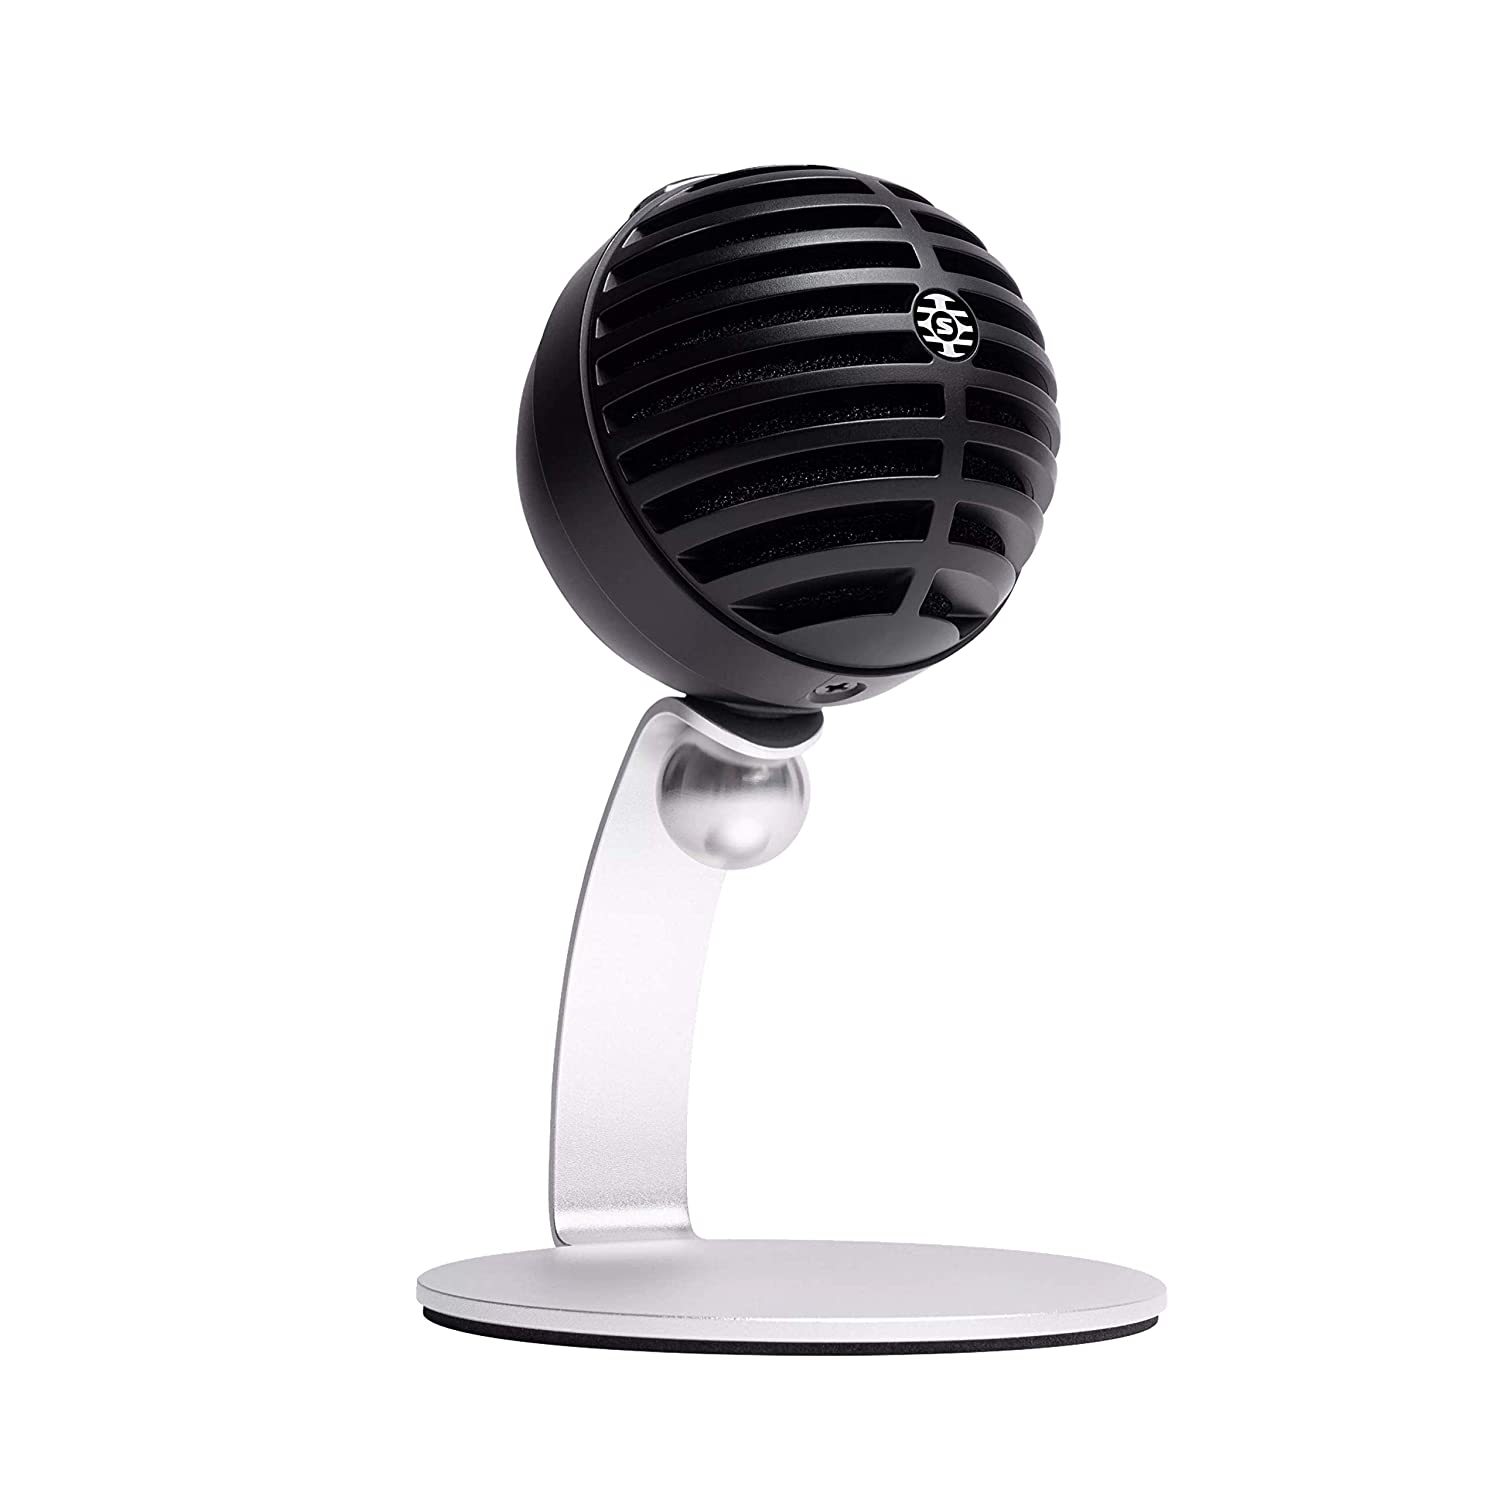 Shure MV5C Home Office Microphone, Conferencing Microphone for Mac & PC, Crystal